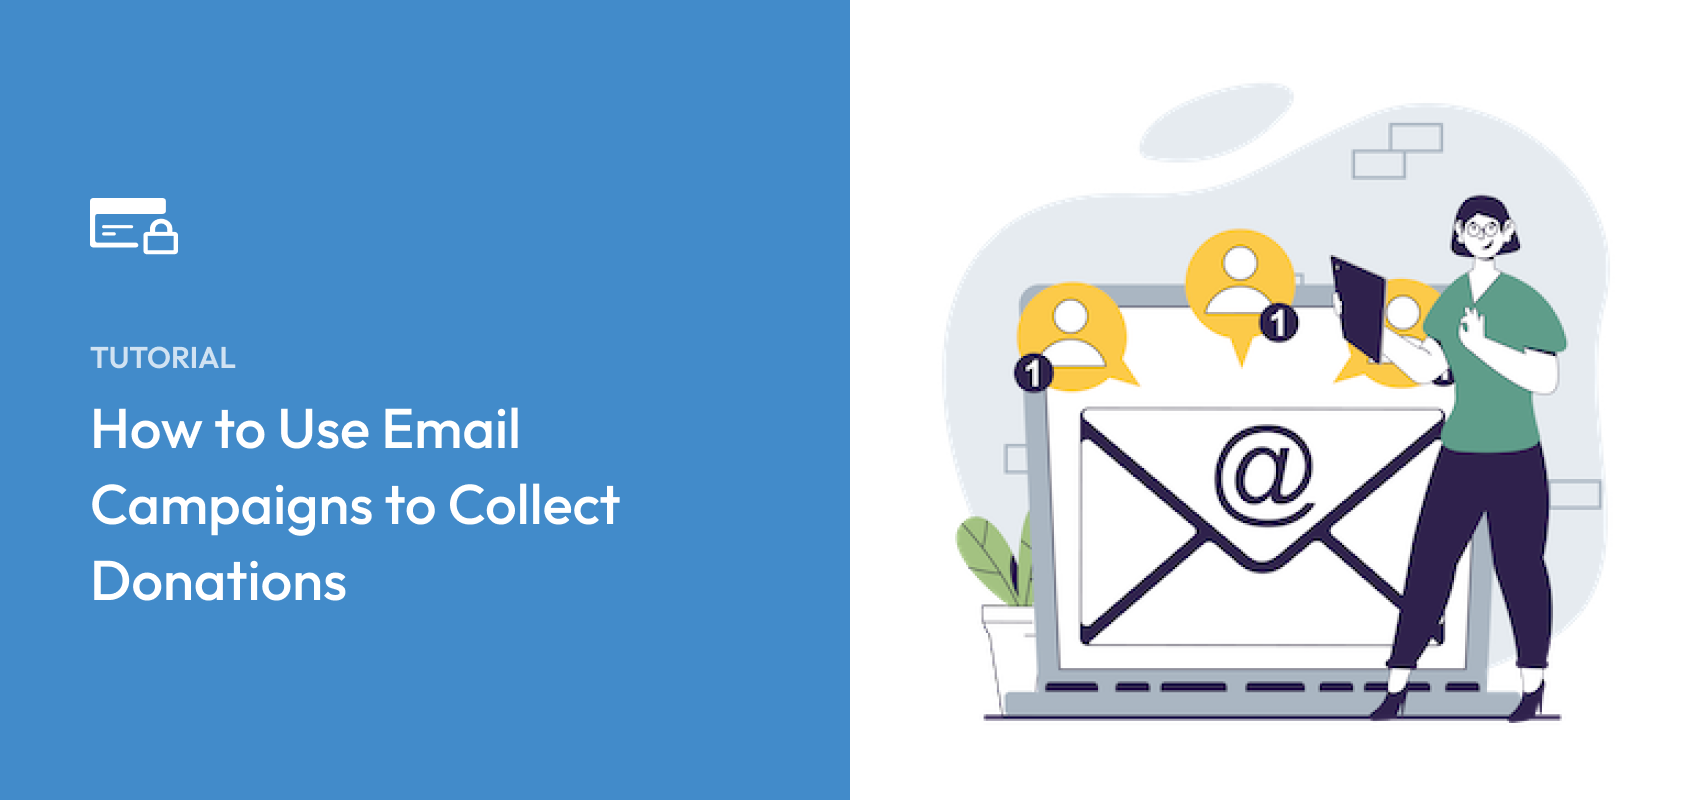 How to Use Email Campaigns to Collect Donations